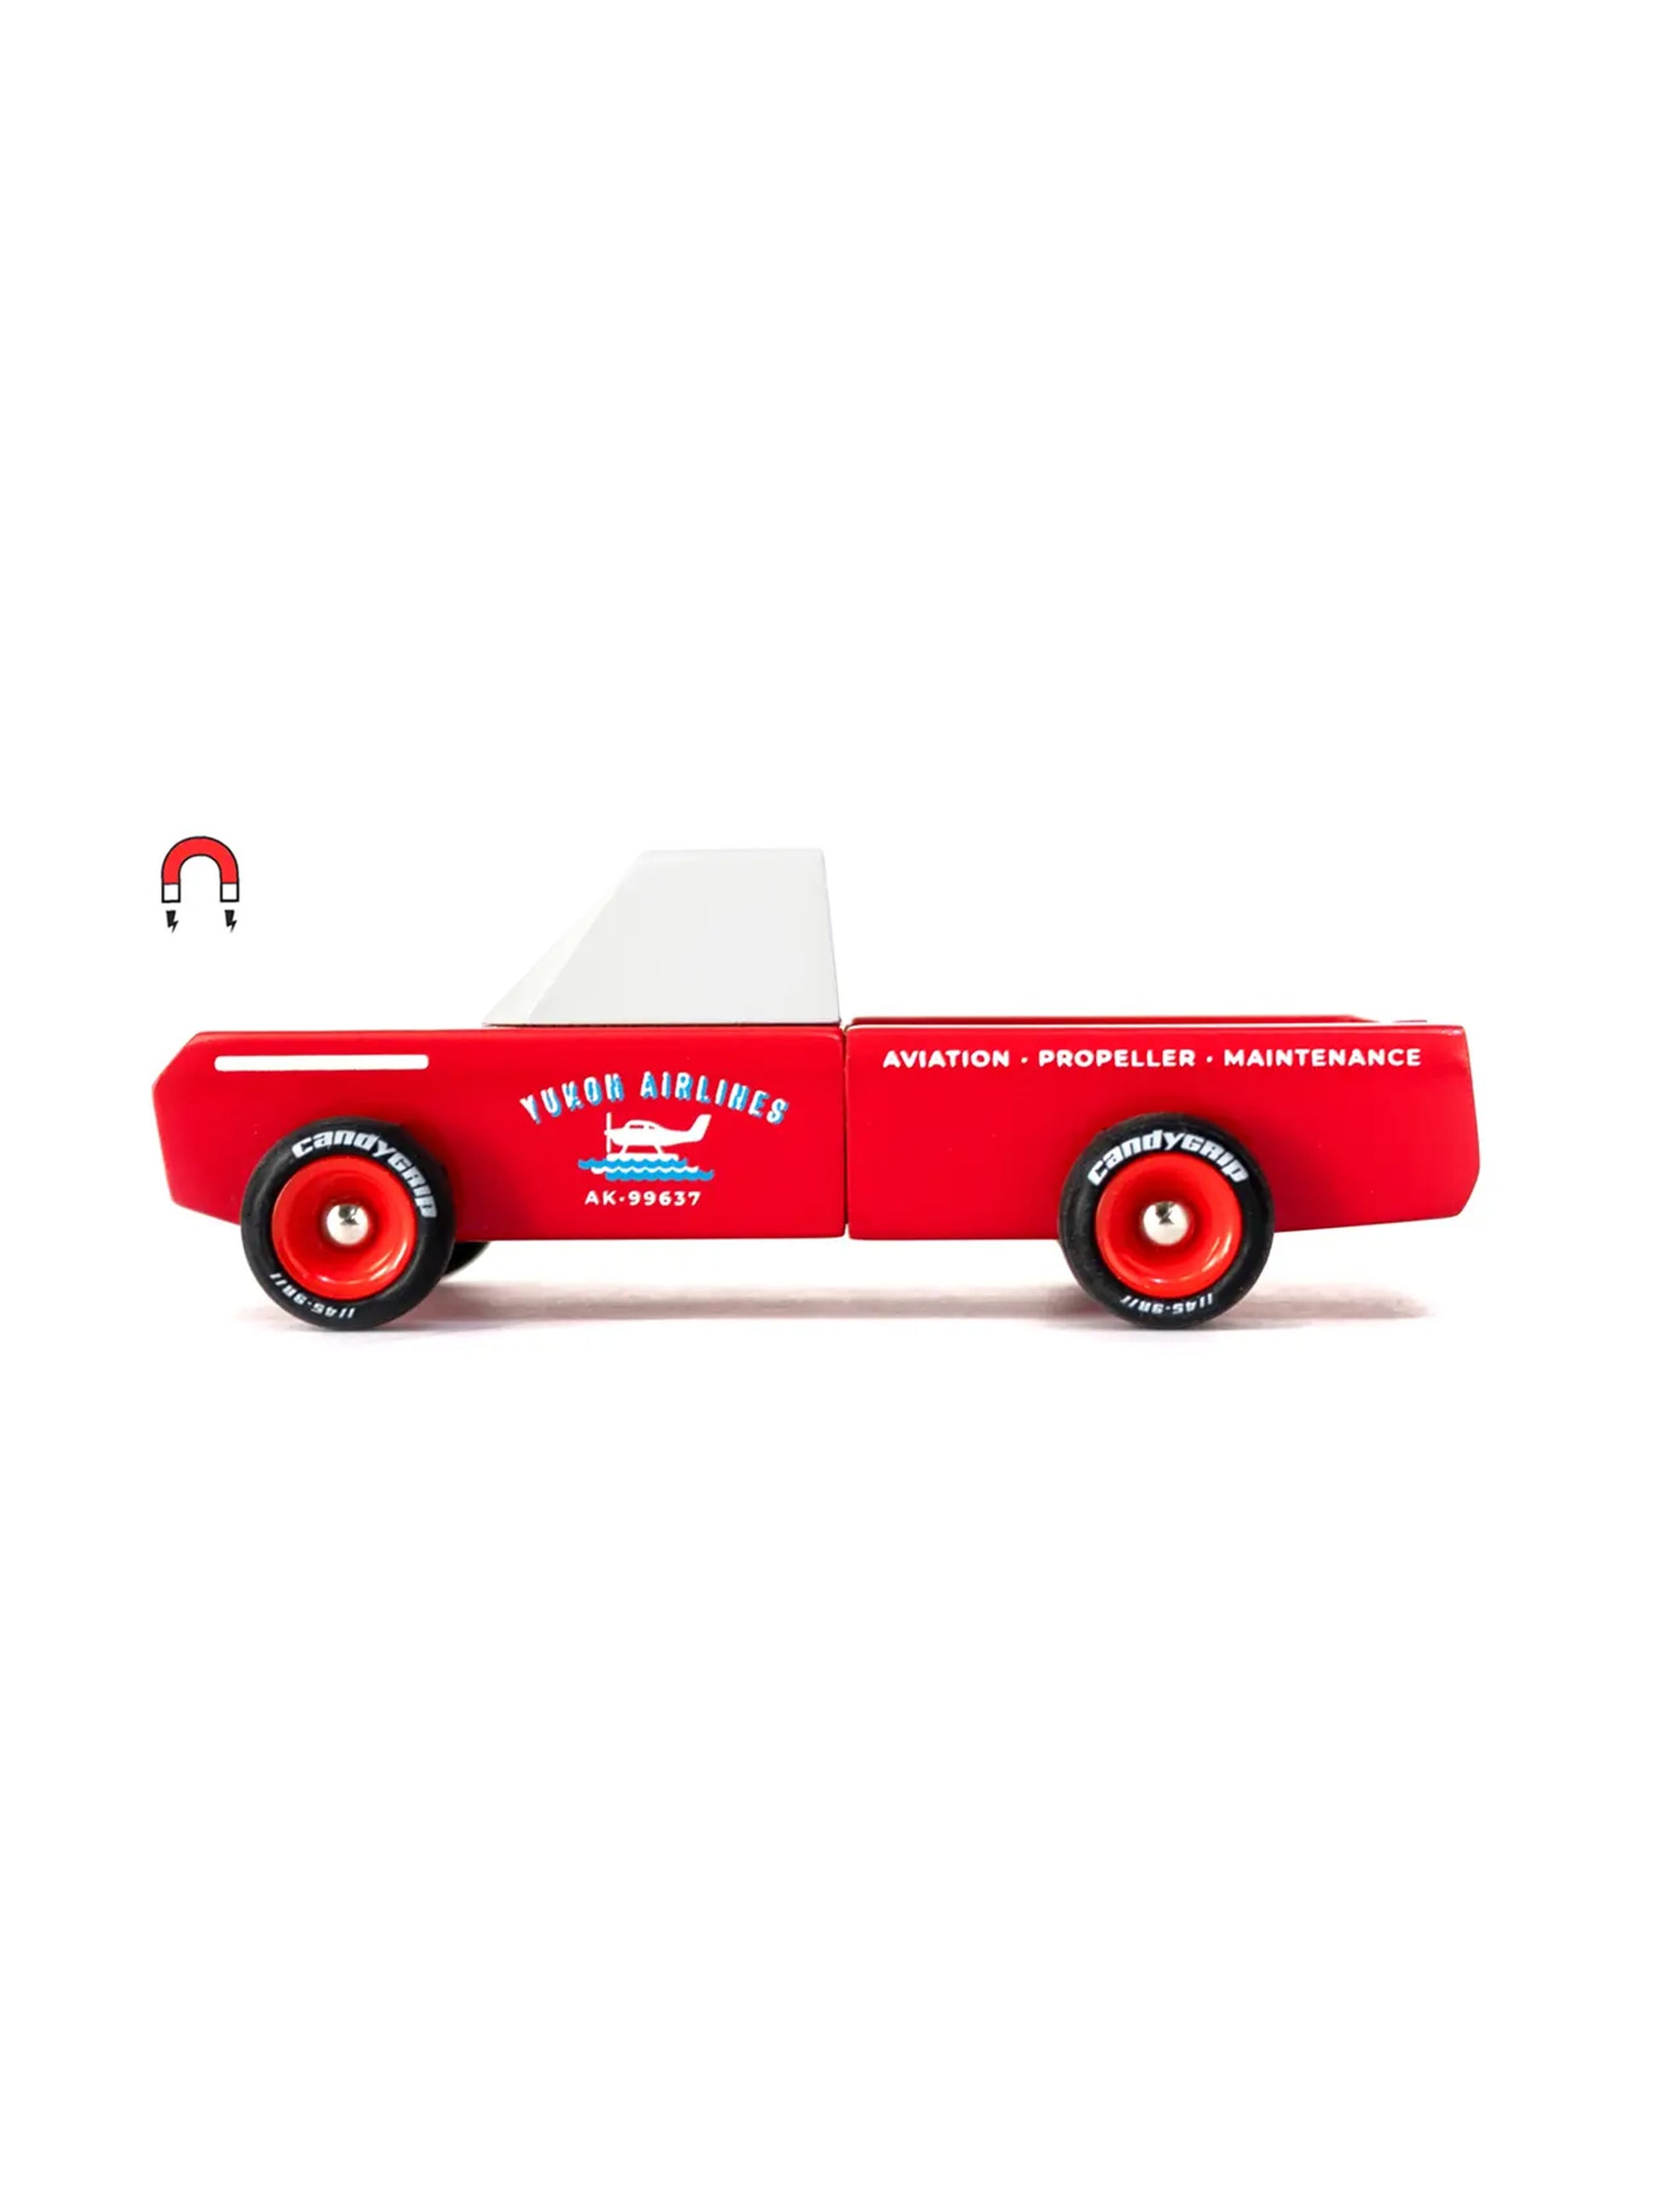 Candylab Toys Longhorn Red Weston Table